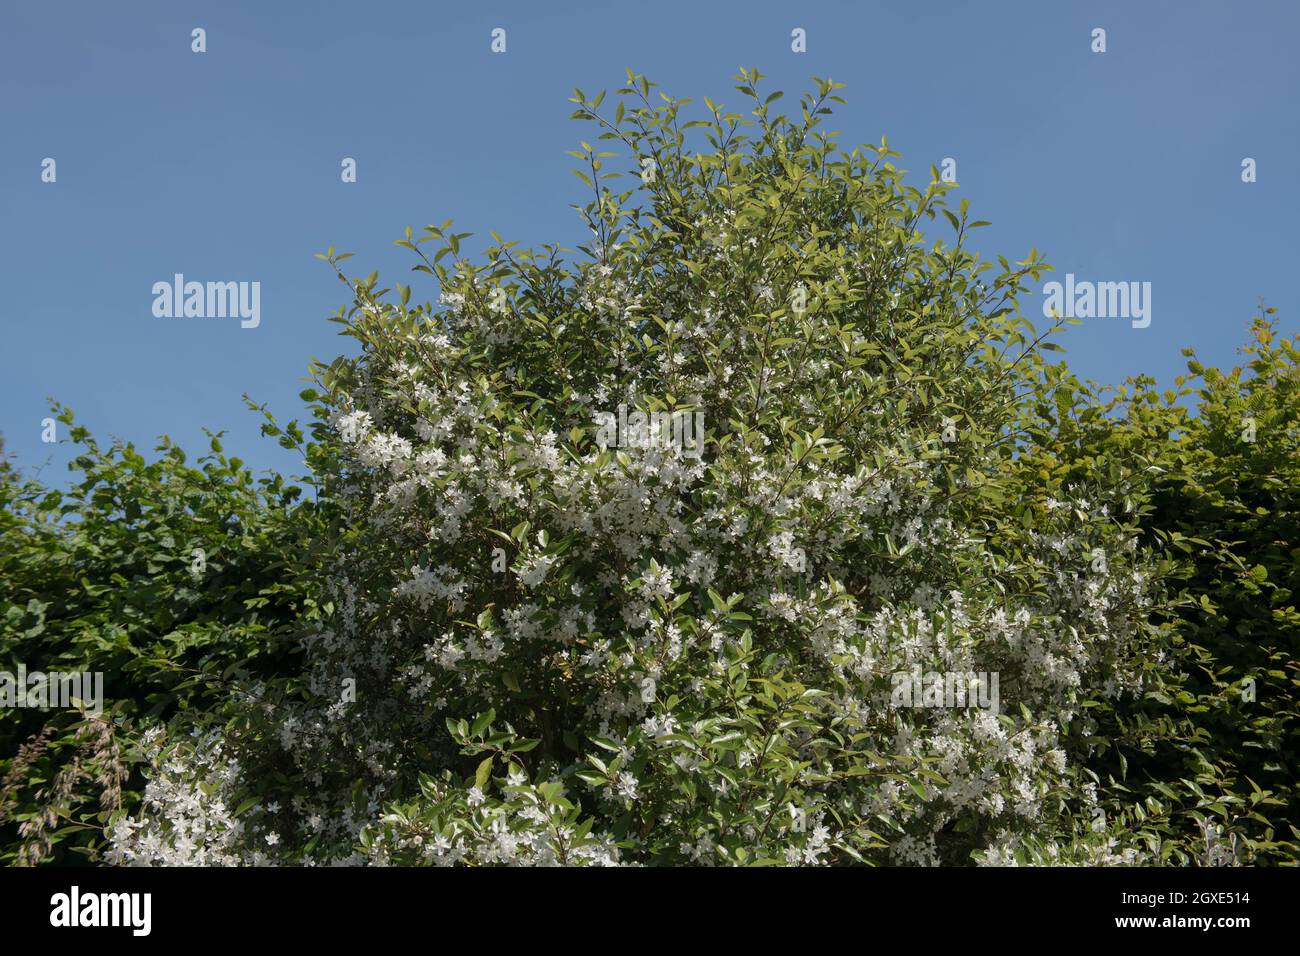 Summer Flowering White Flowers of an Evergreen Long Leaved Lacebark or Ribbonwood Tree (Hoheria sexstylosa) with a Bright Blue Sky Background Stock Photo